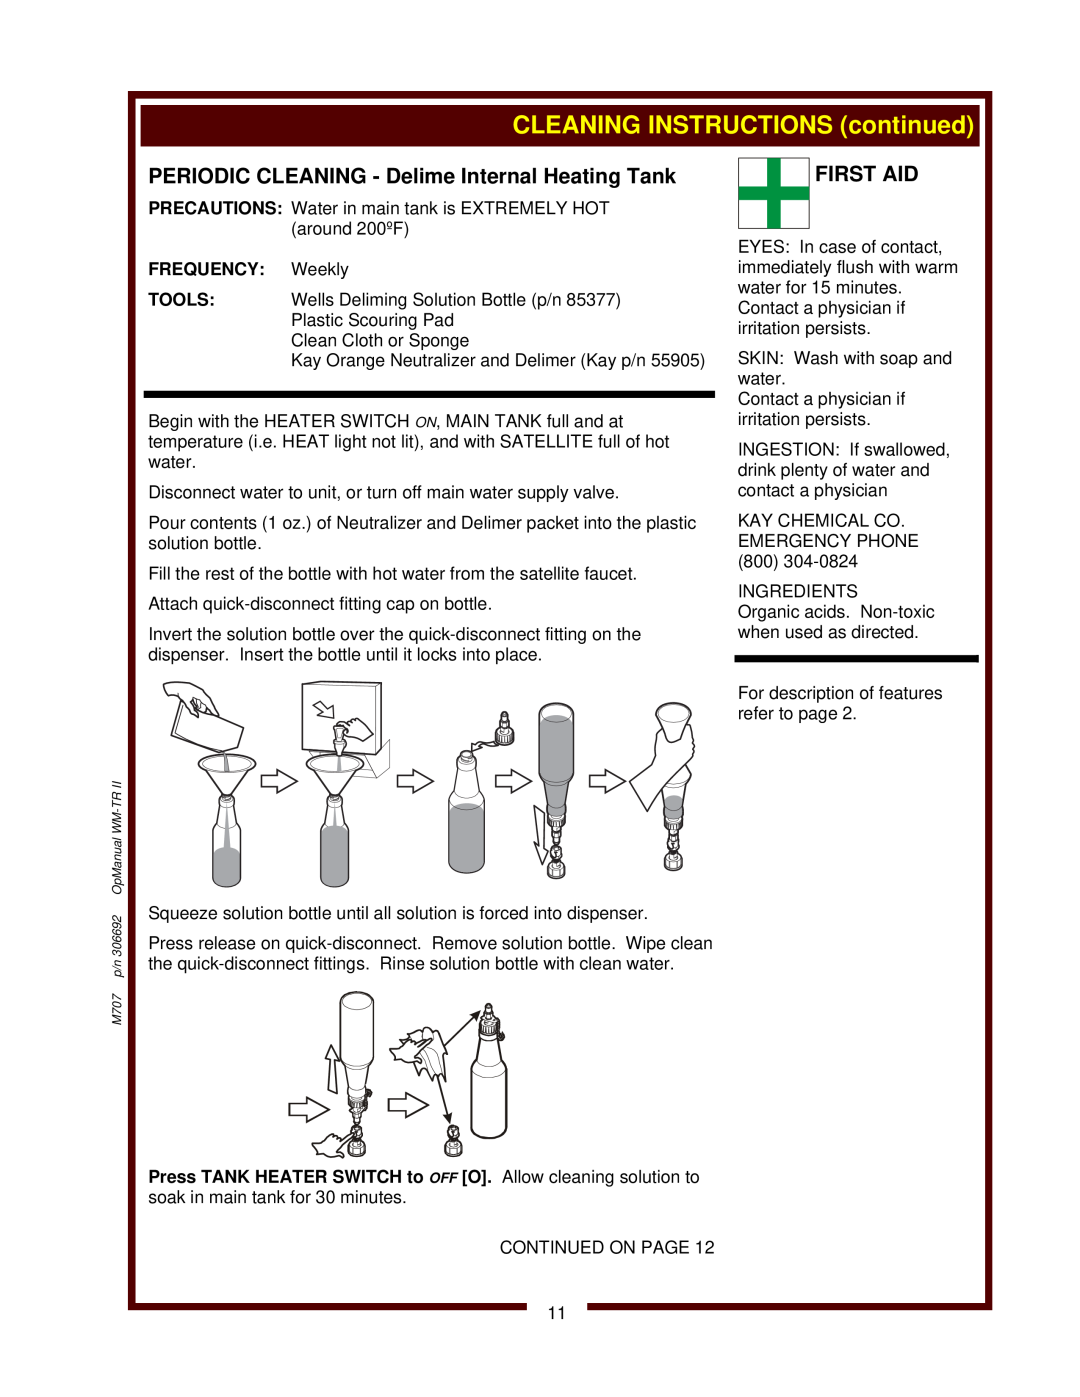 Wells WM-TR II operation manual CLEANING INSTRUCTIONS continued, First Aid 